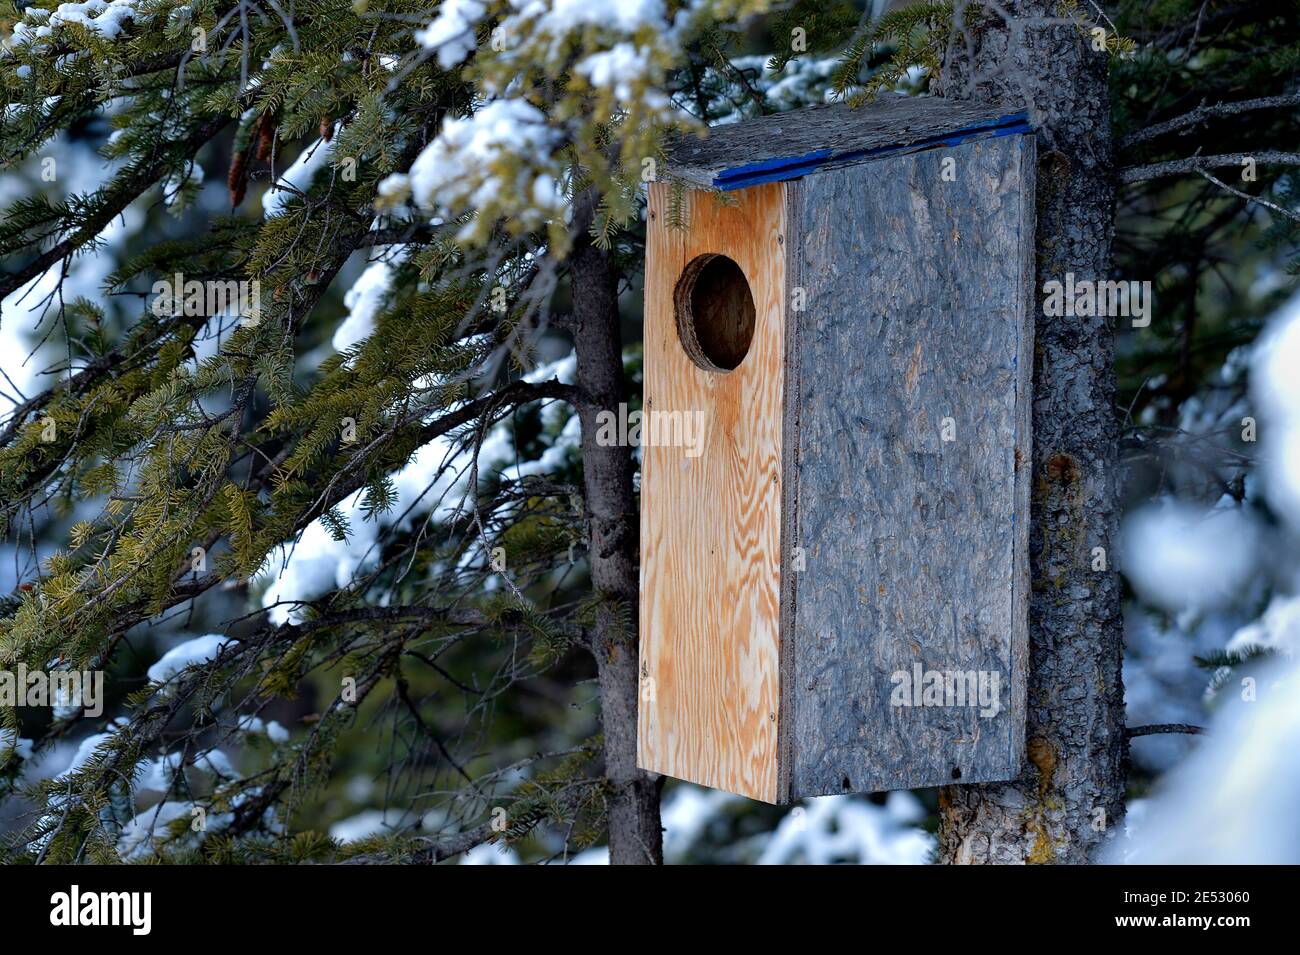 A duck nest box high in a spruce tree awaiting the spring migratory nesting season in rural Alberta Canada. Stock Photo